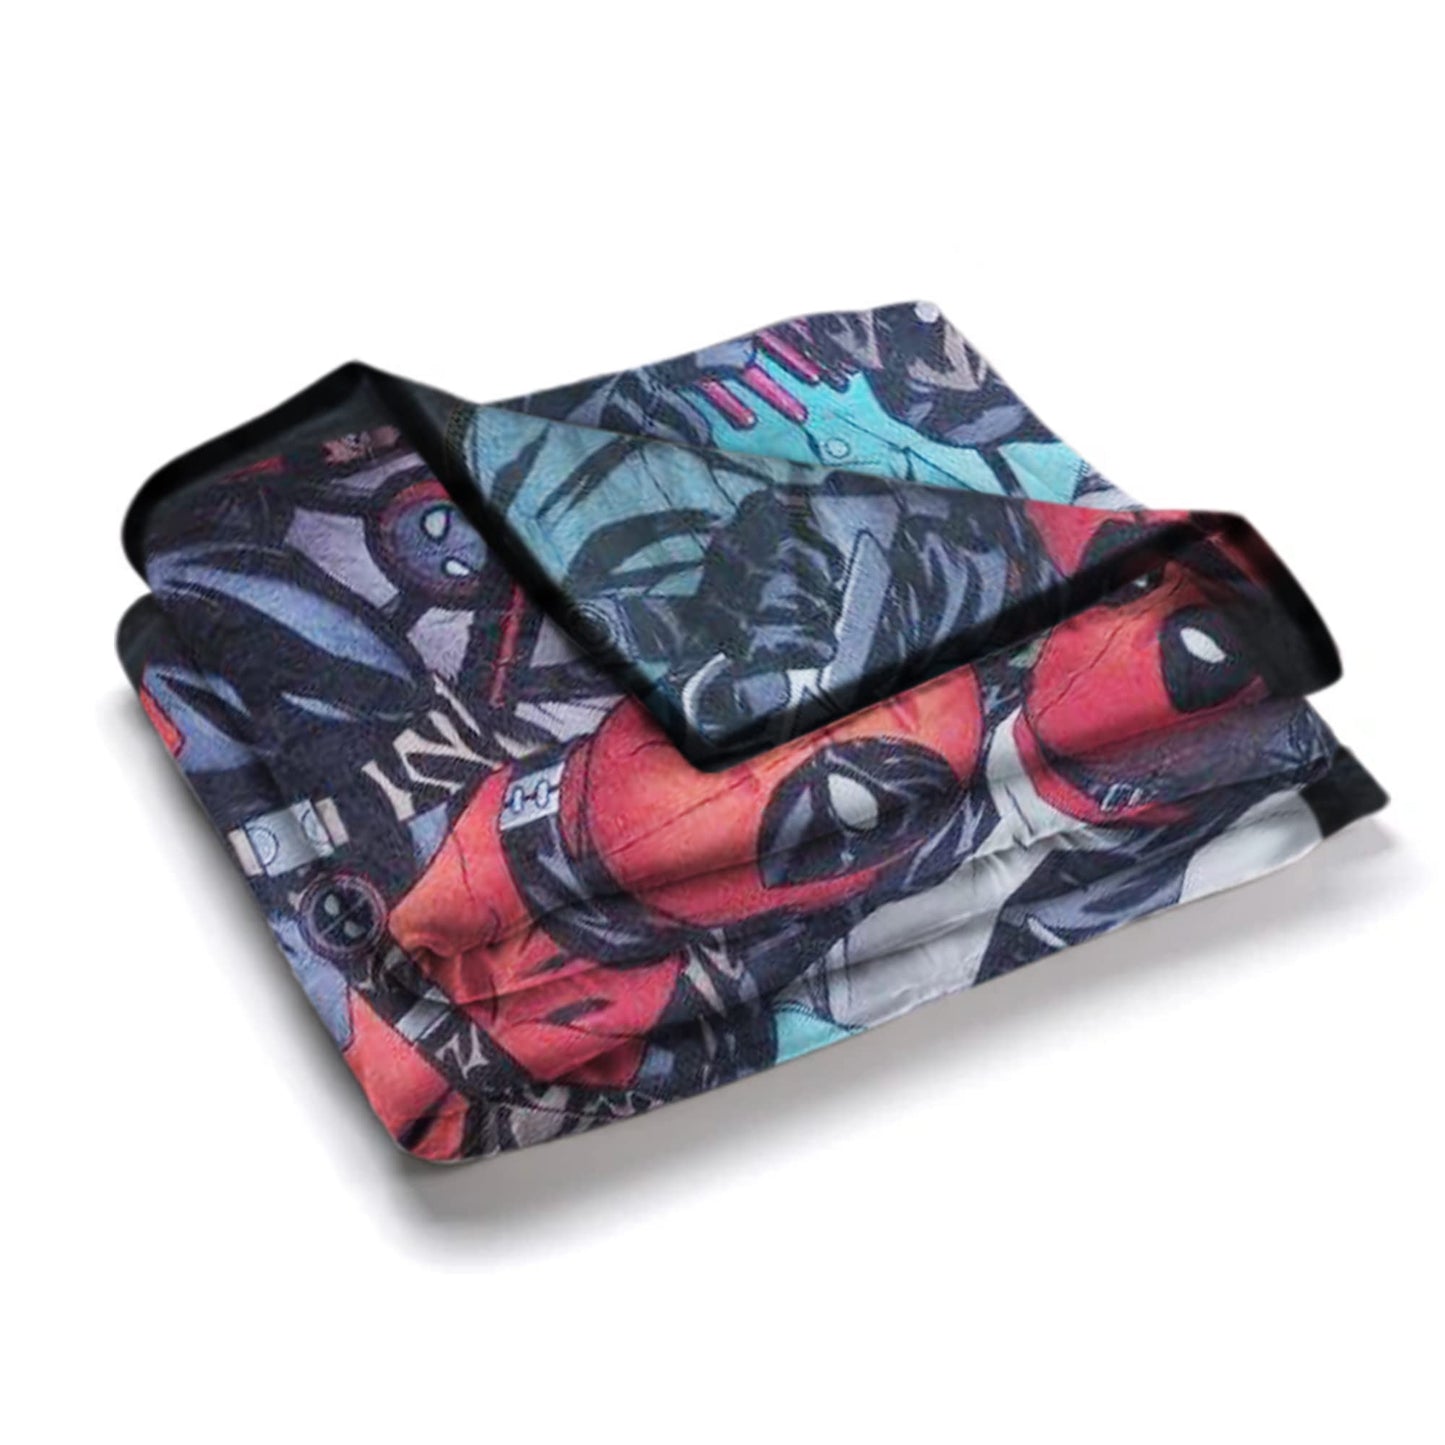 Marvel Deadpool Faces Fleece Fleece Softest Comfy Throw Blanket for Adults & Kids| Measures 60 x 45 Inches